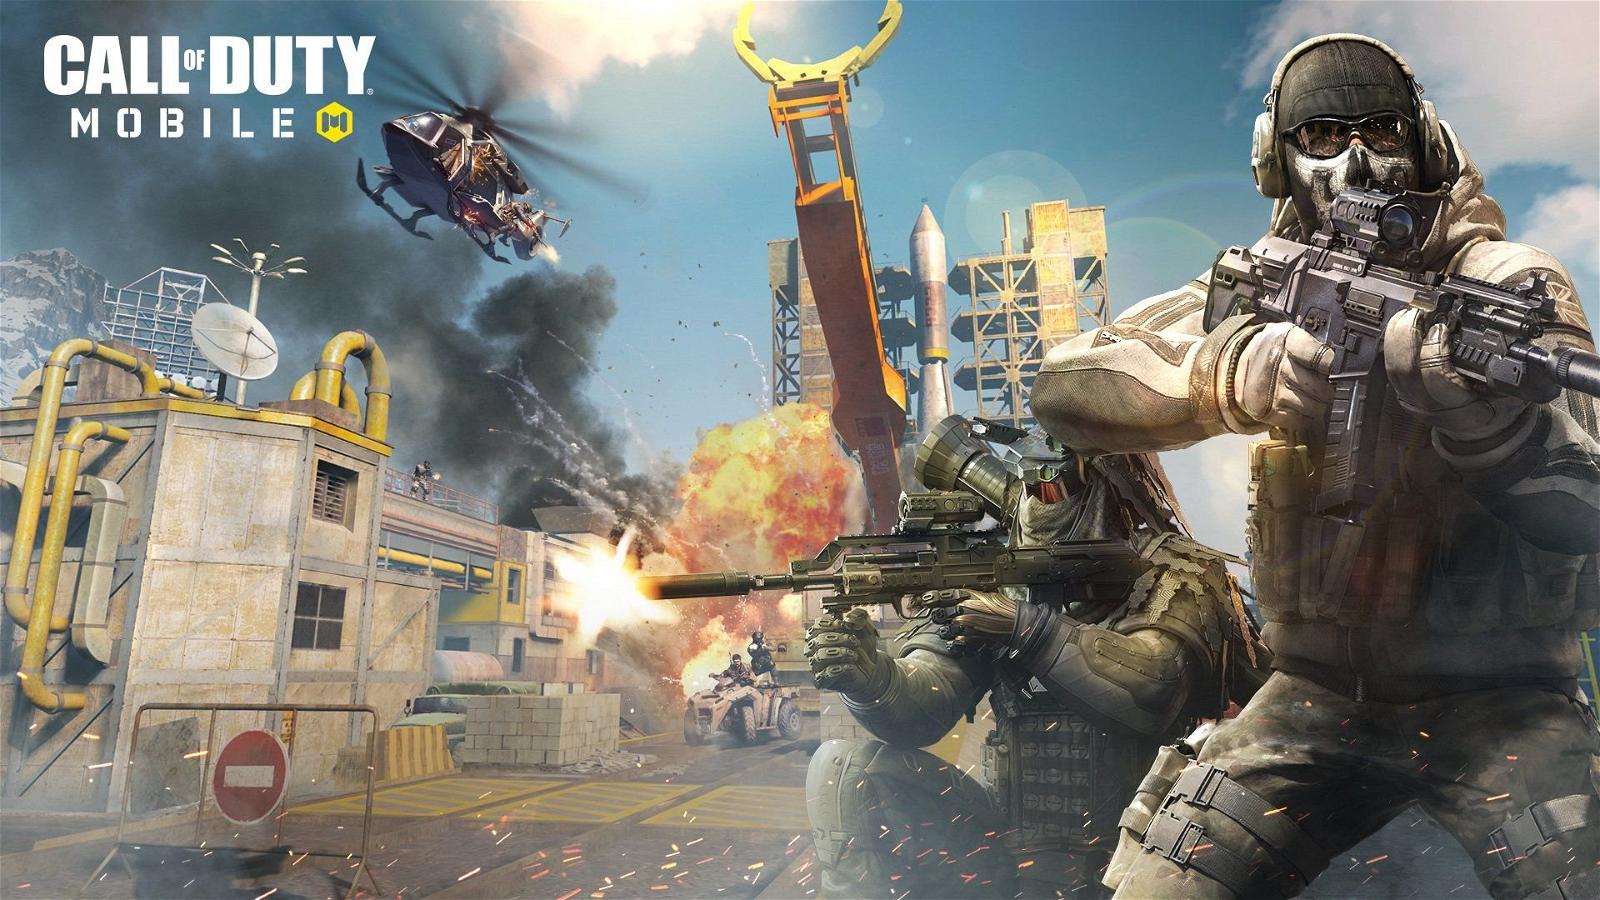 ‘Call of Duty’ mobile version to be released October 1st